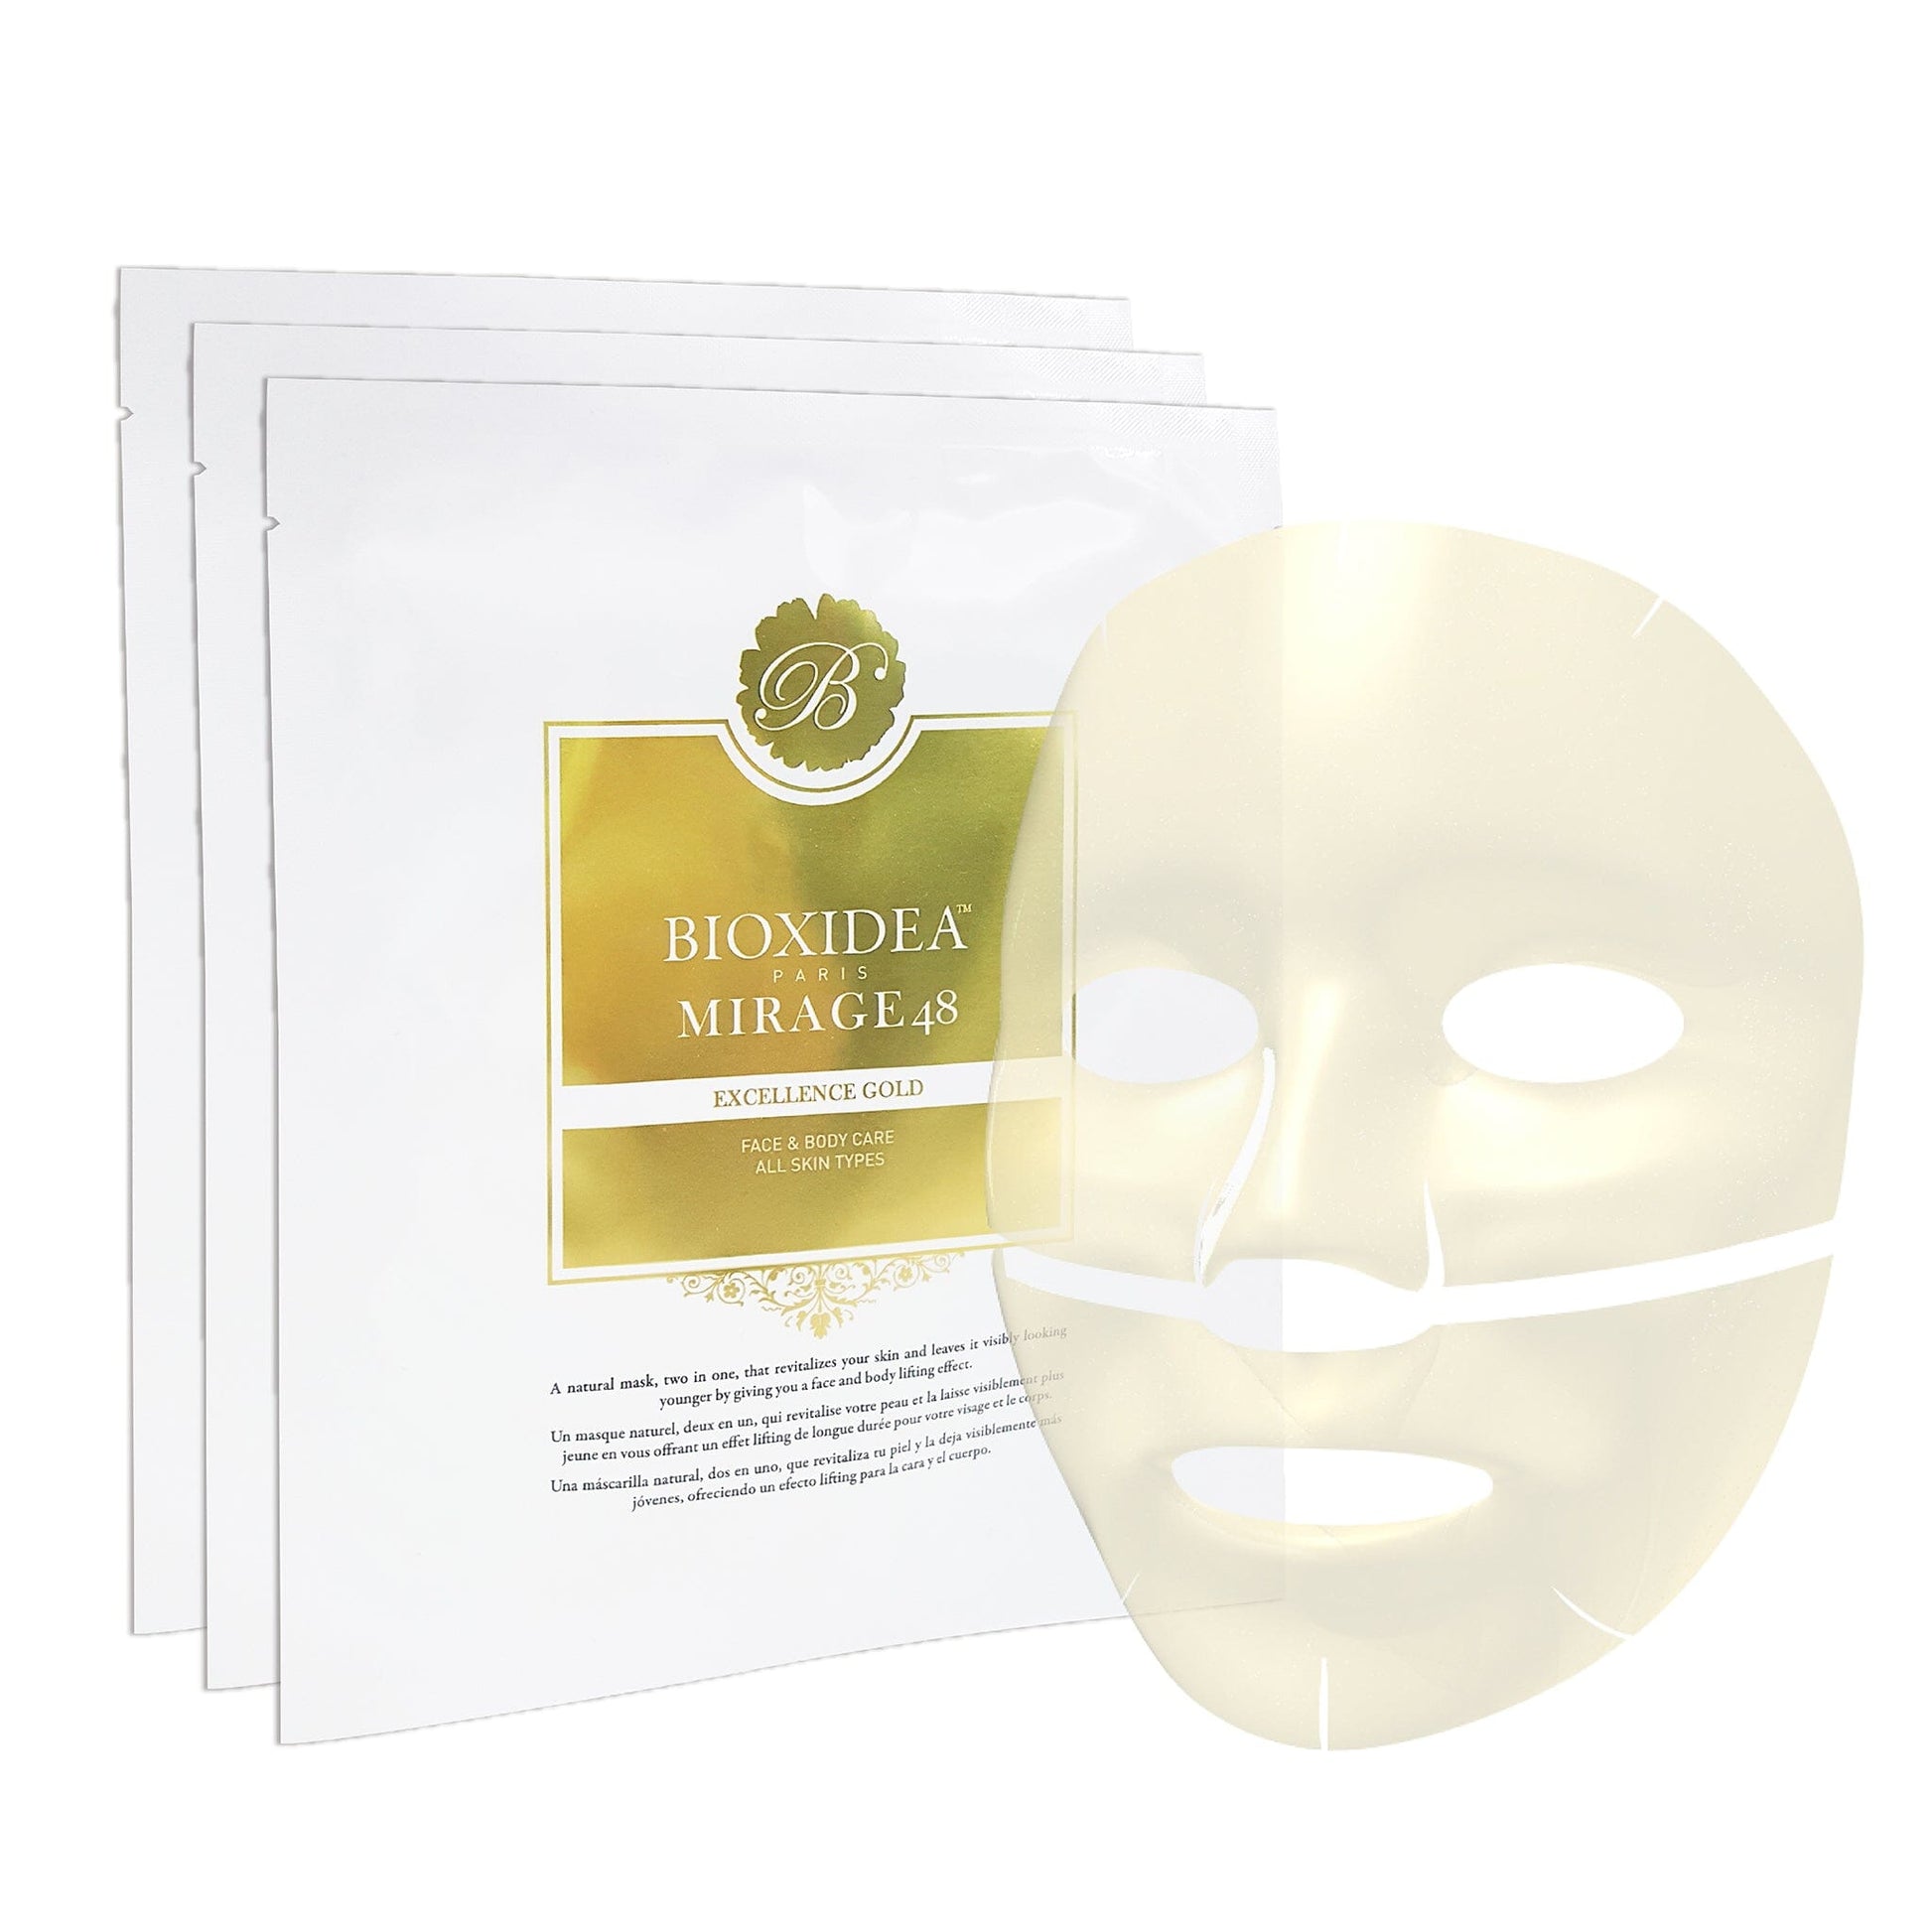 BIOXIDEA Mirage48 Excellence Gold Face & Body Mask Mask 